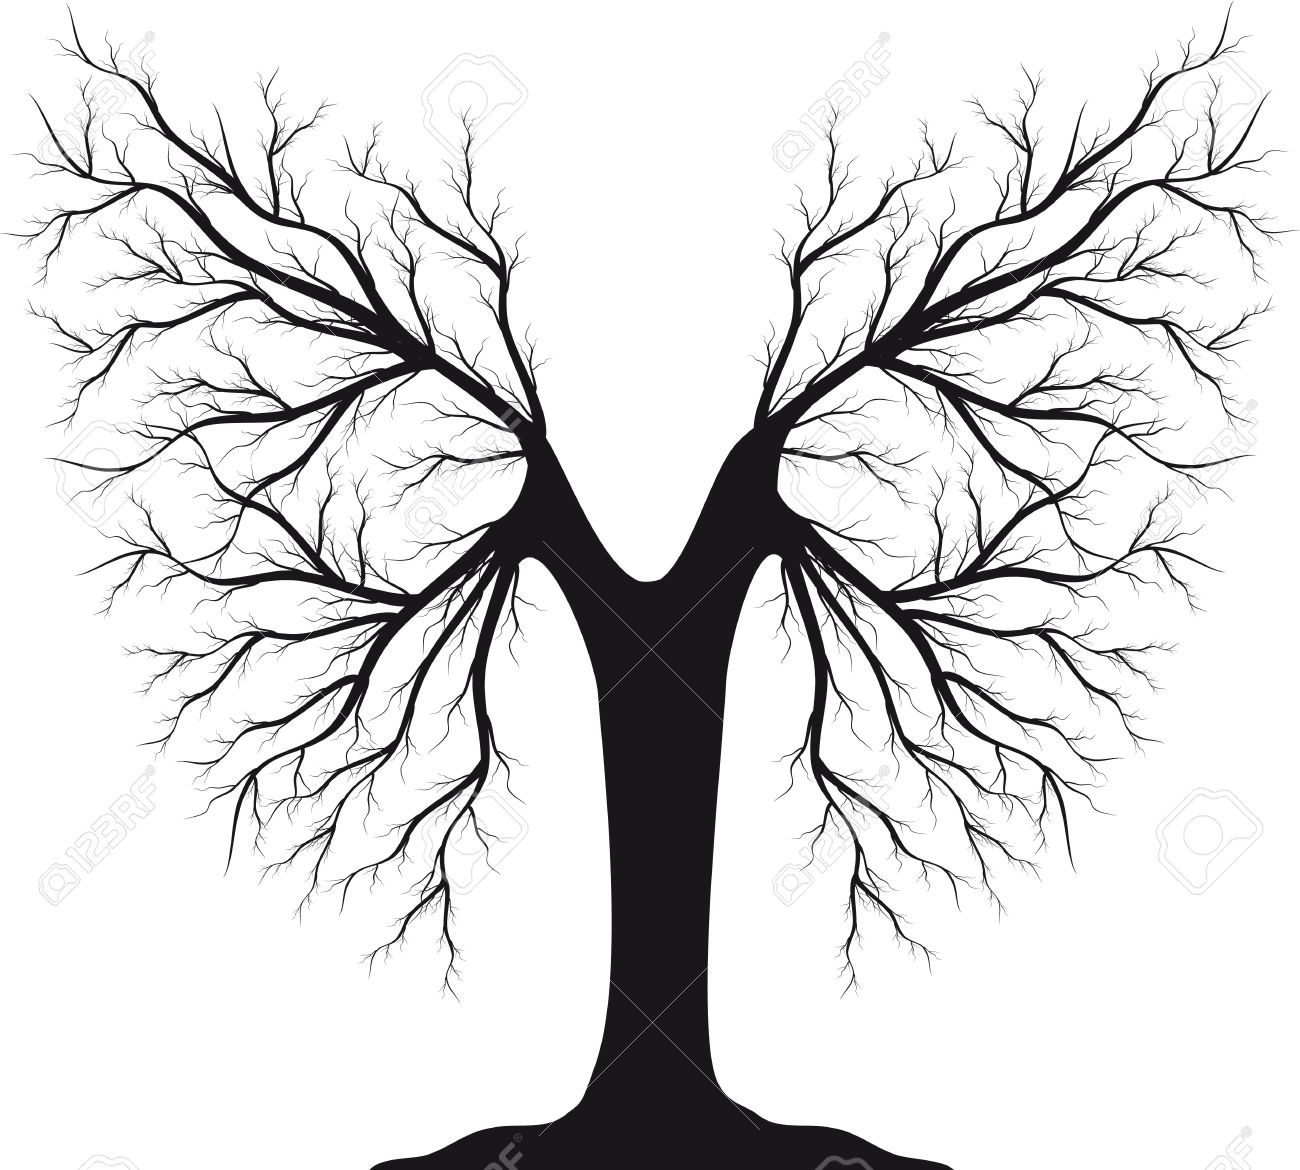 free vector black white shade tree clipart - Clipground